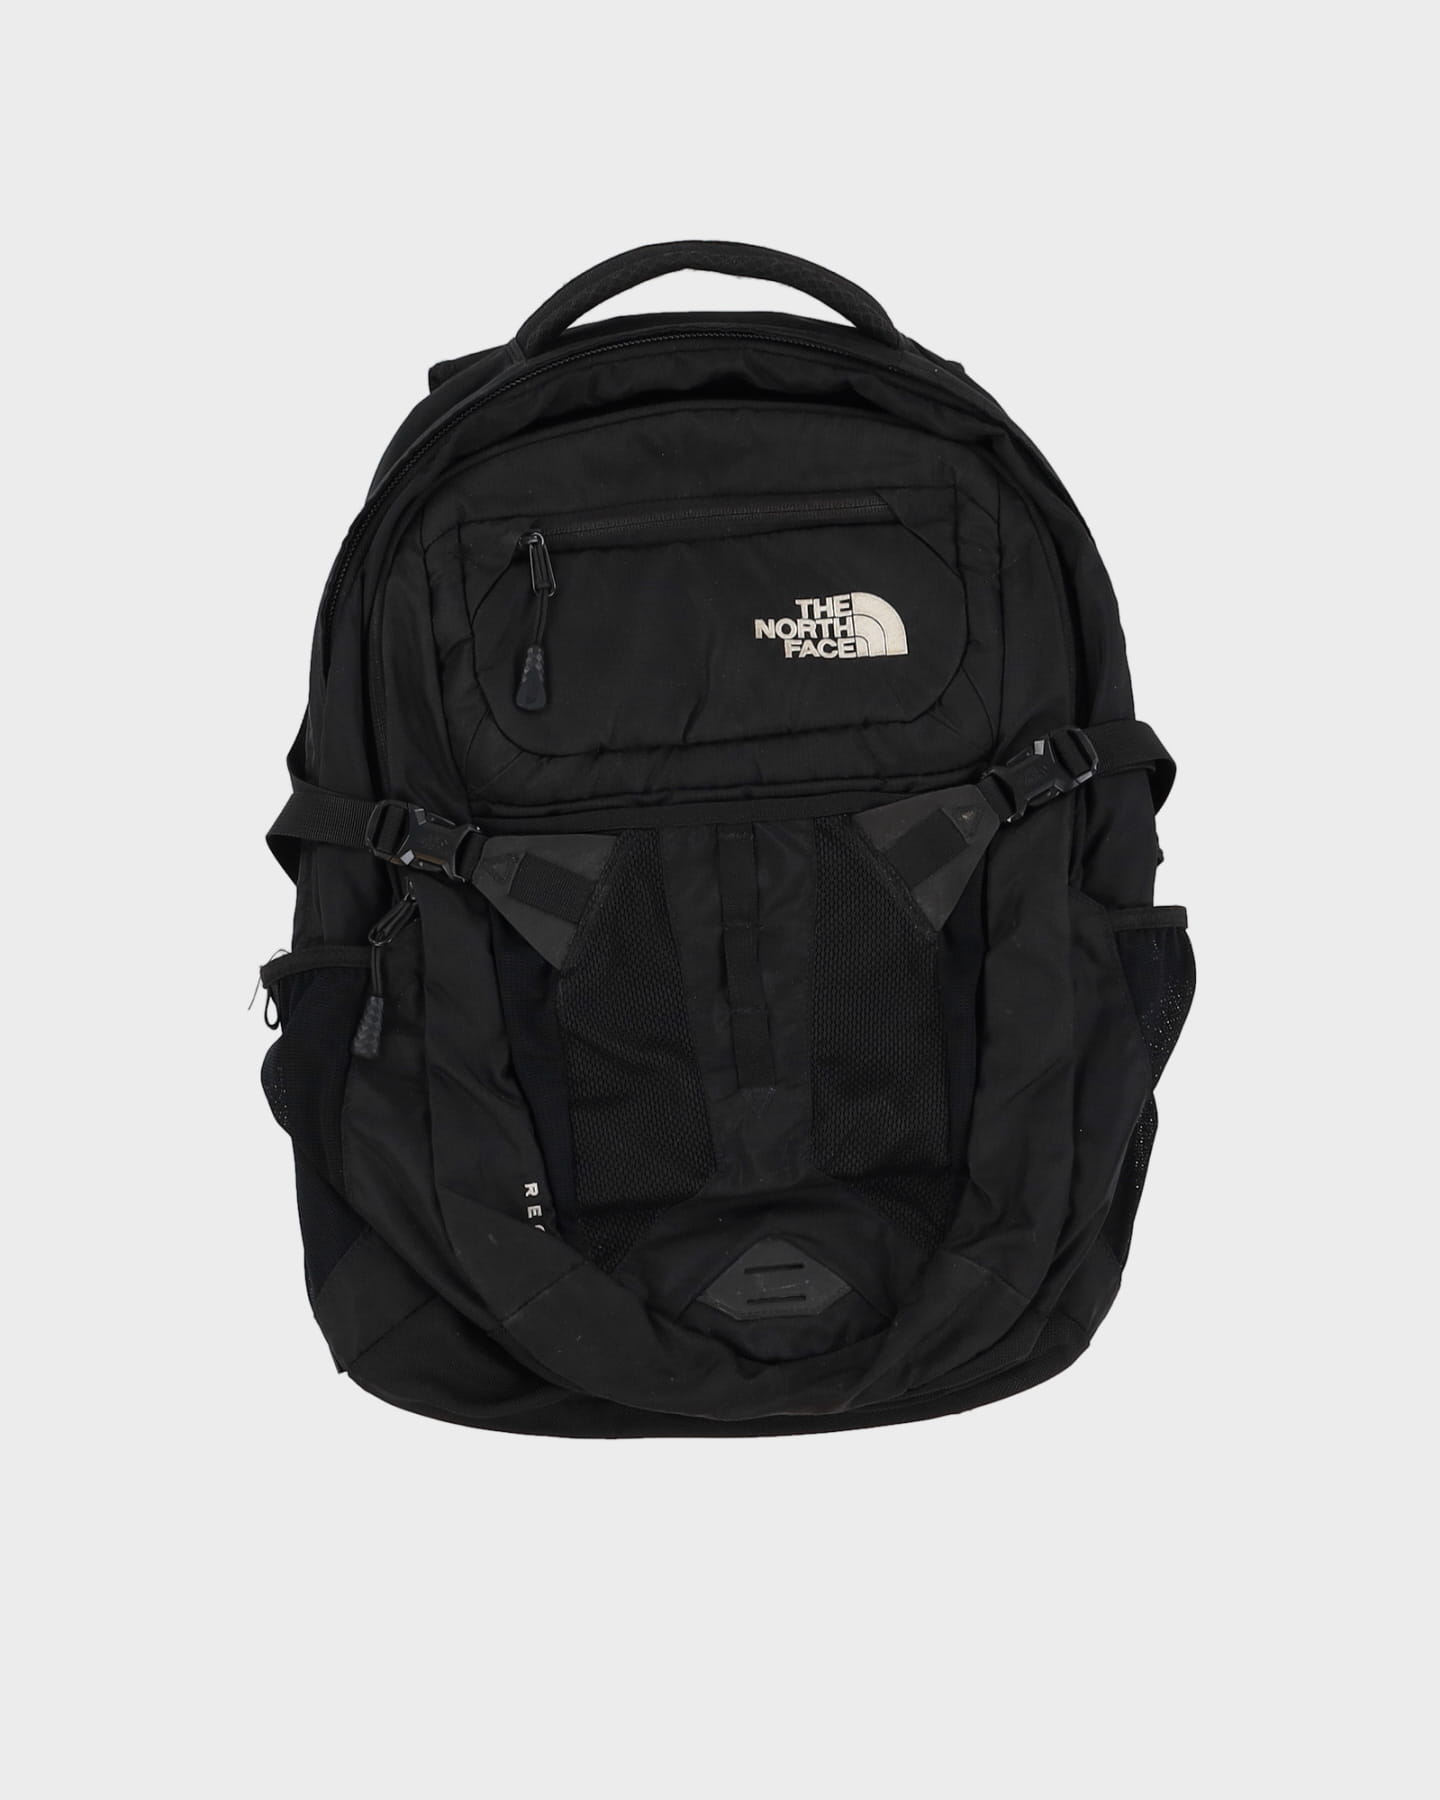 The North Face Black Recon Rucksack / Backpack